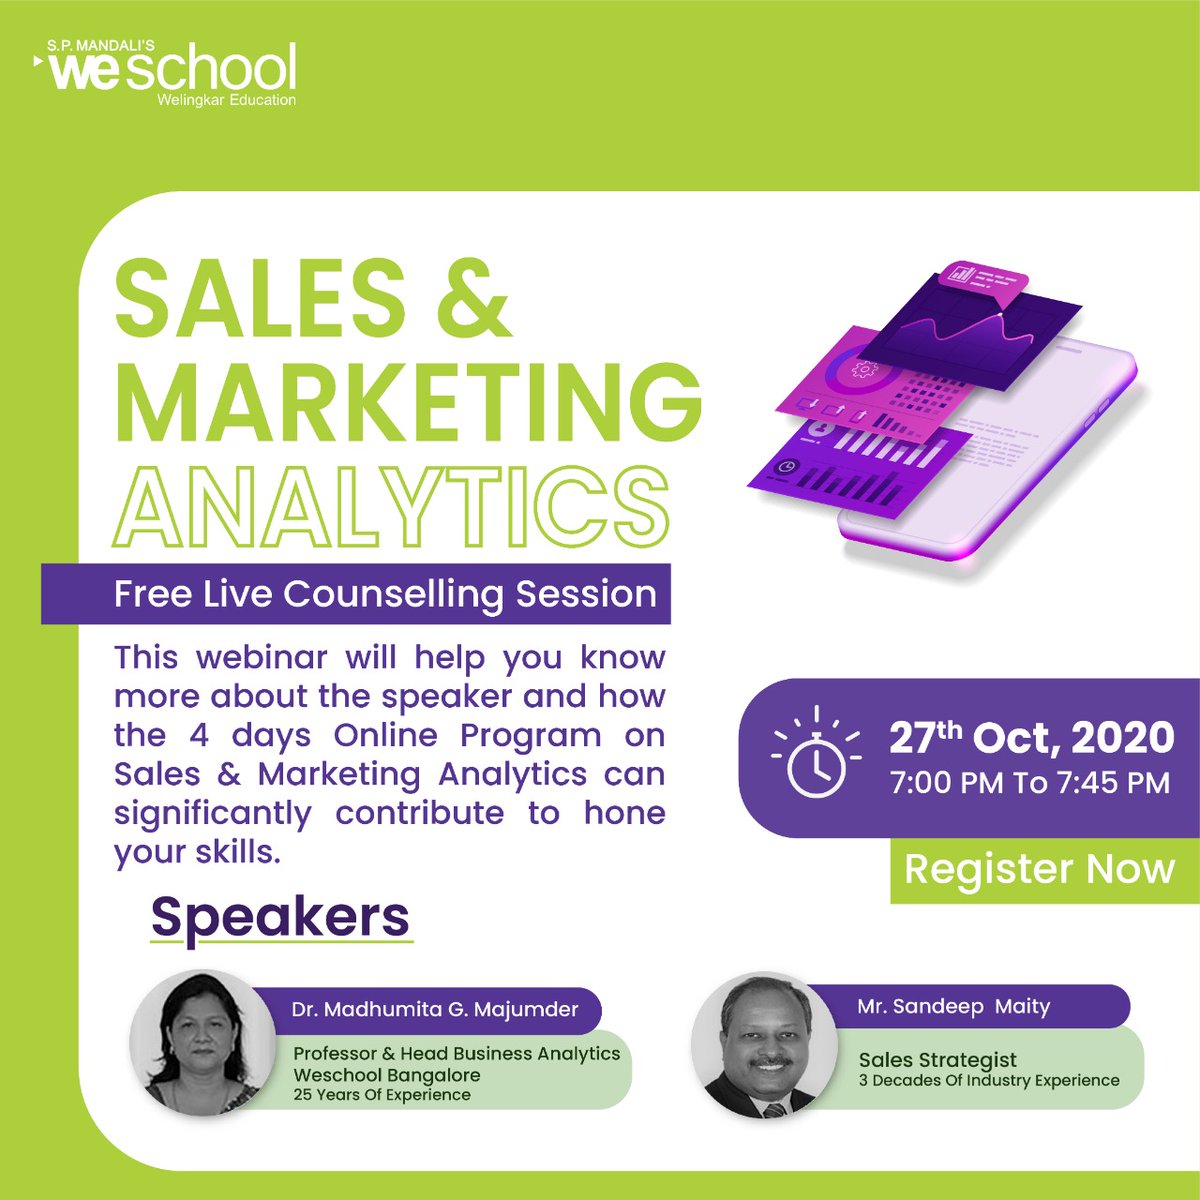 #FreeCounsellingSession
Explore the benefits of Sales & Marketing Analytics Program and uncover new markets, new audience niches, areas for future development and much more!!!

Register Now!!!
Link: attendee.gotowebinar.com/register/43825…

Hurry!!! Limited Seats Only...
.
.
.
#salesandmarketing